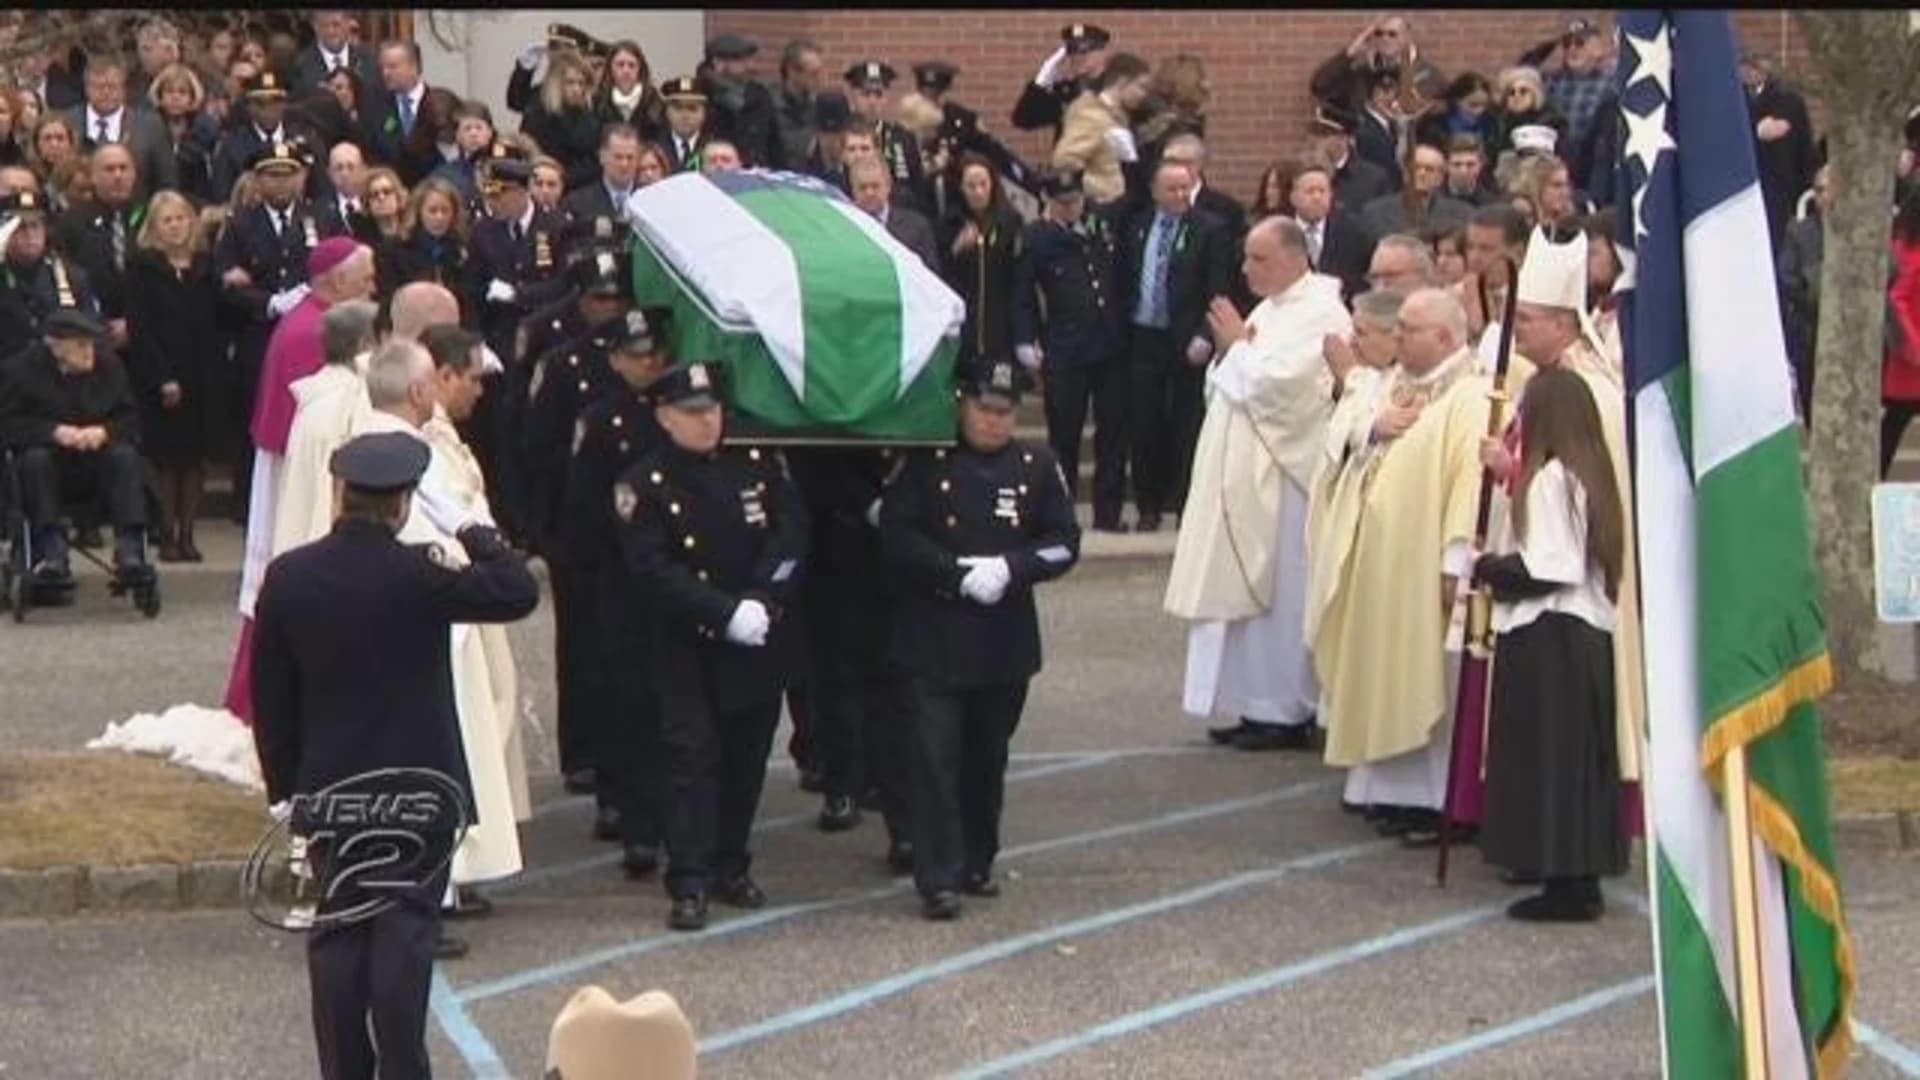 Fallen NYPD detective promoted during funeral Mass